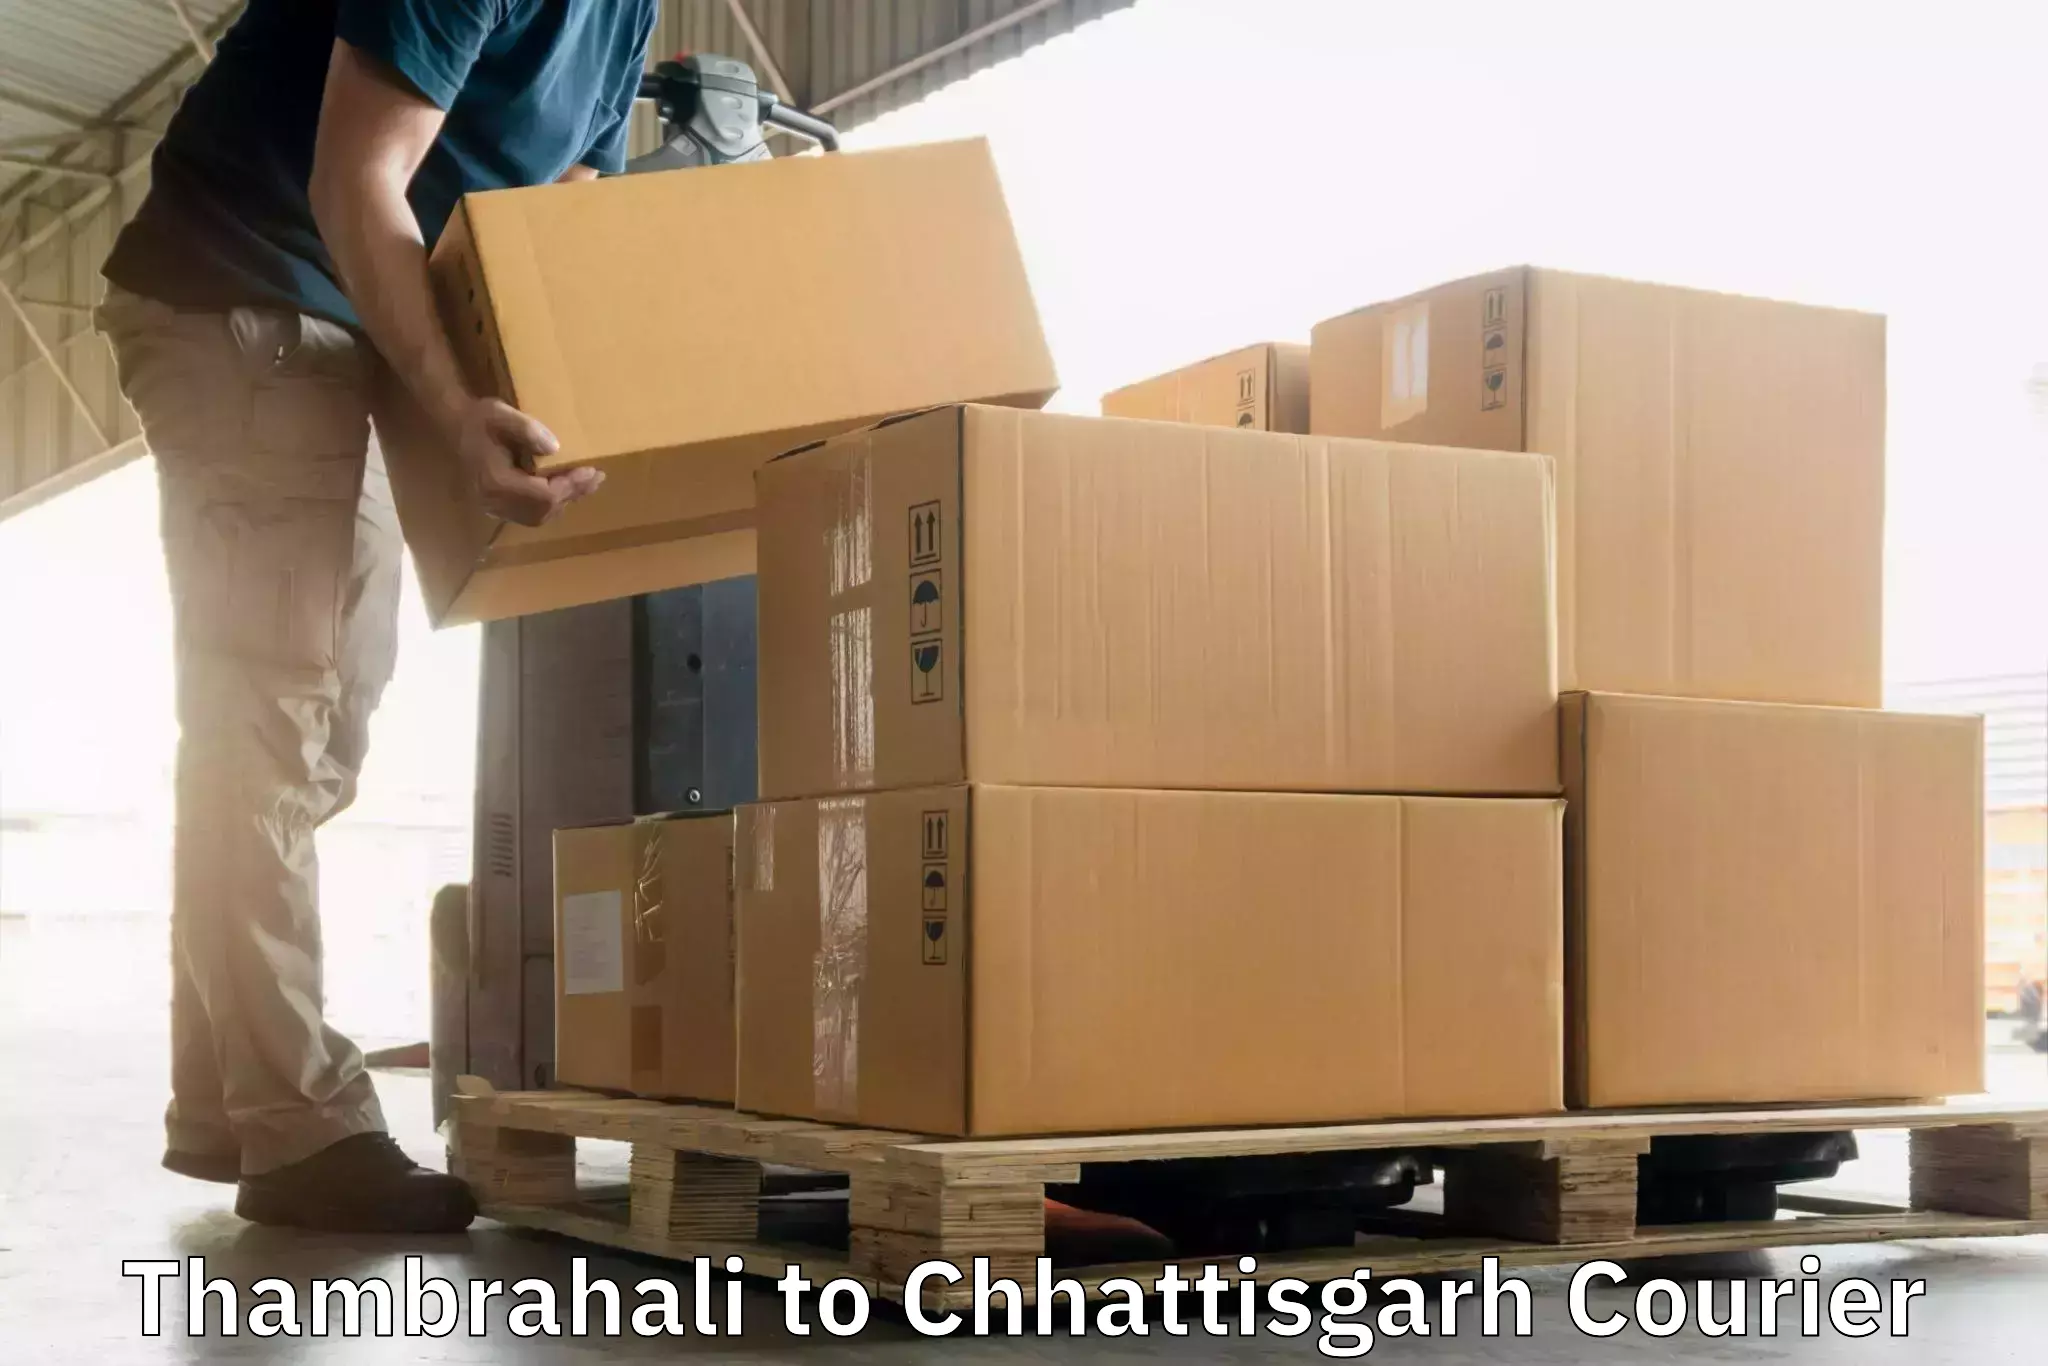 Nationwide courier service Thambrahali to Raigarh